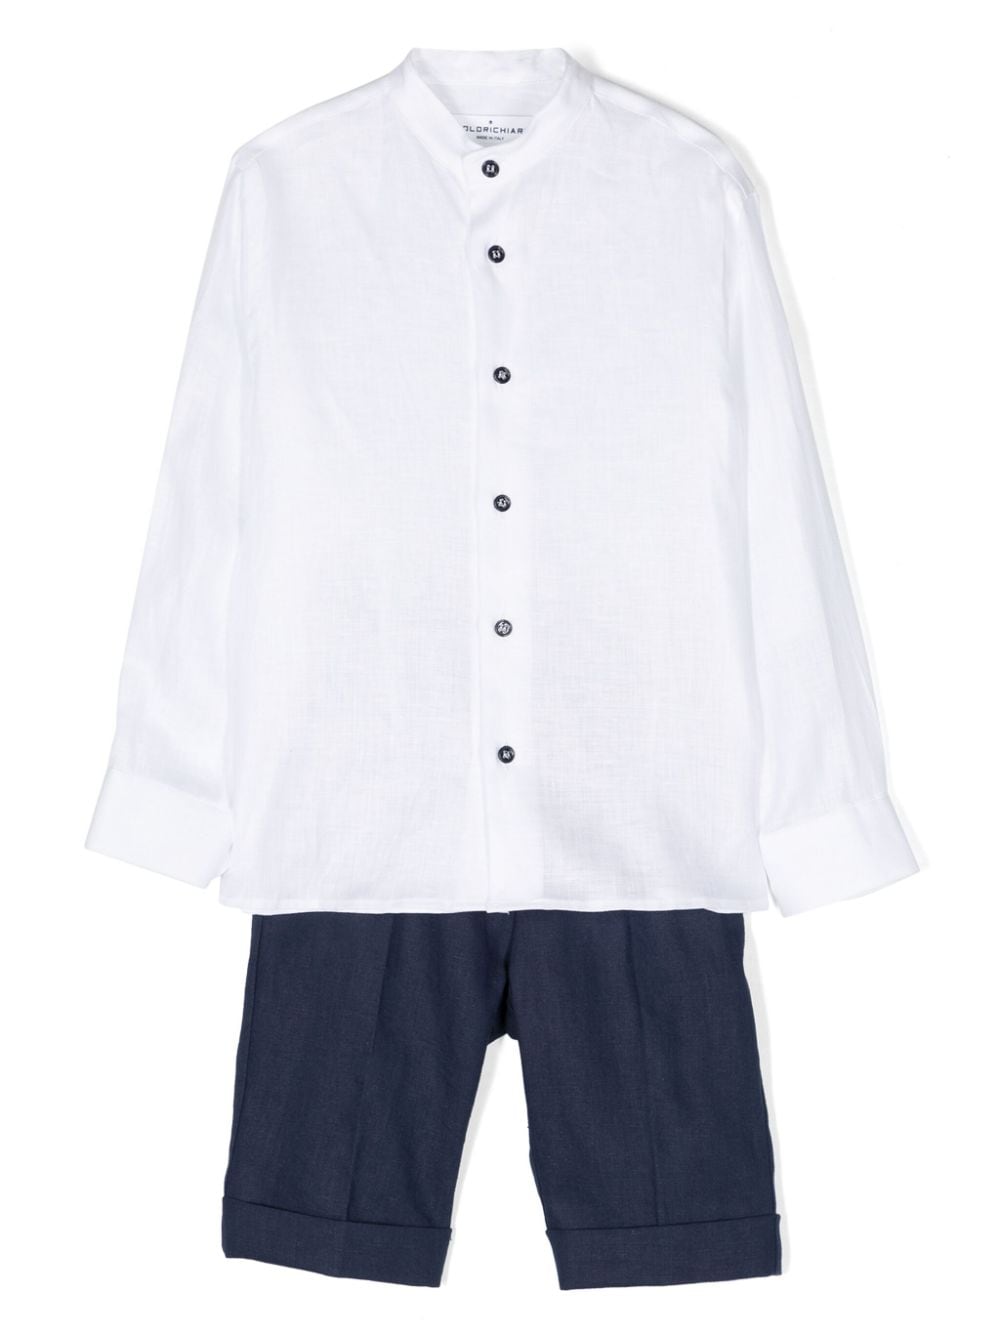 Elegant white and blue suit for boys